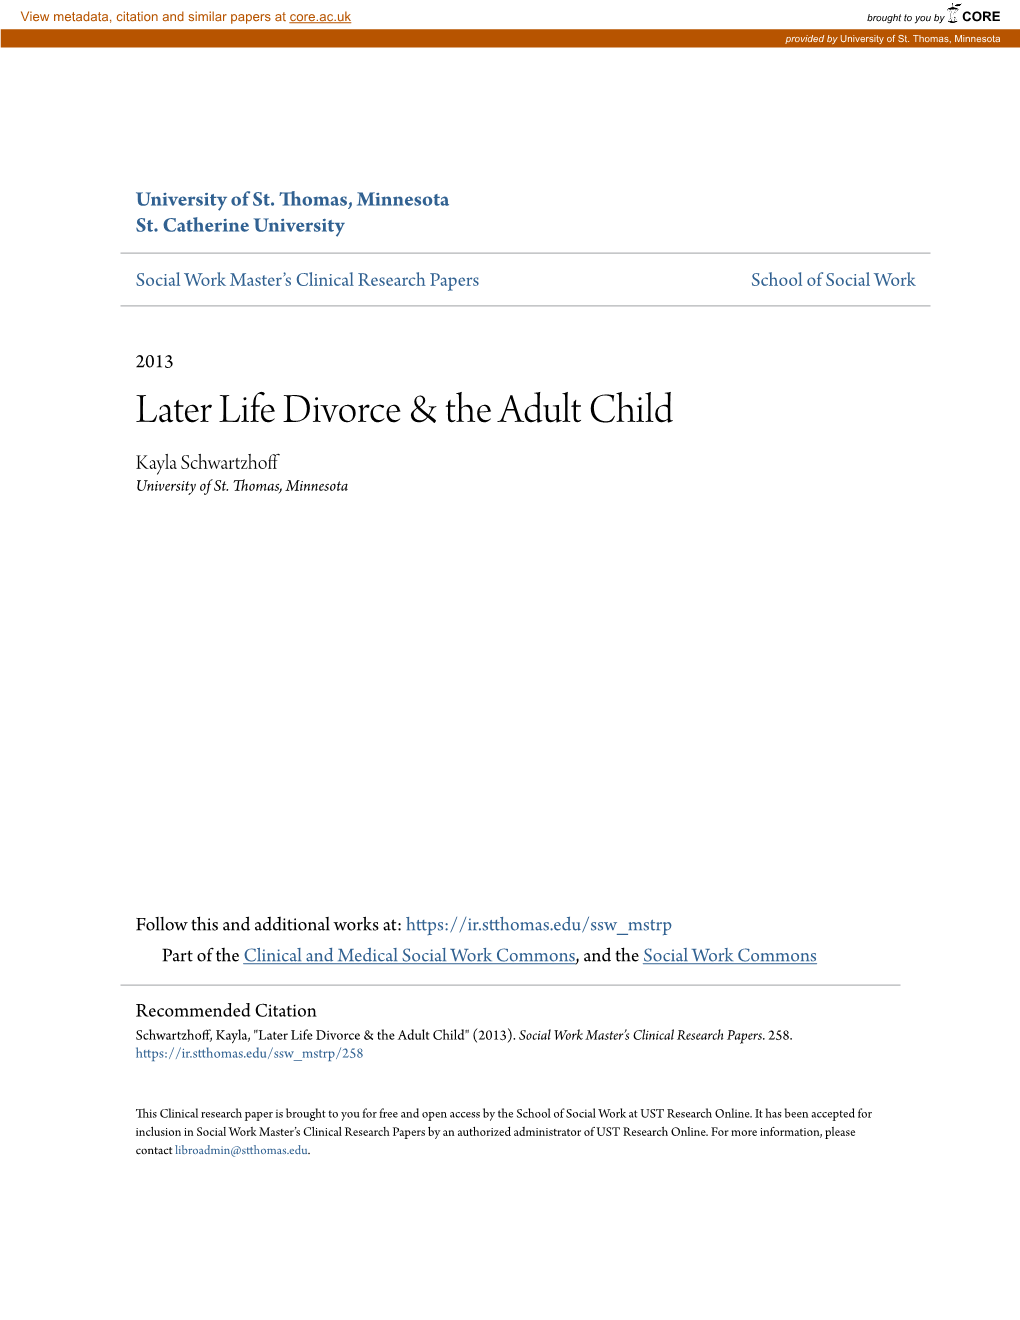 Later Life Divorce & the Adult Child